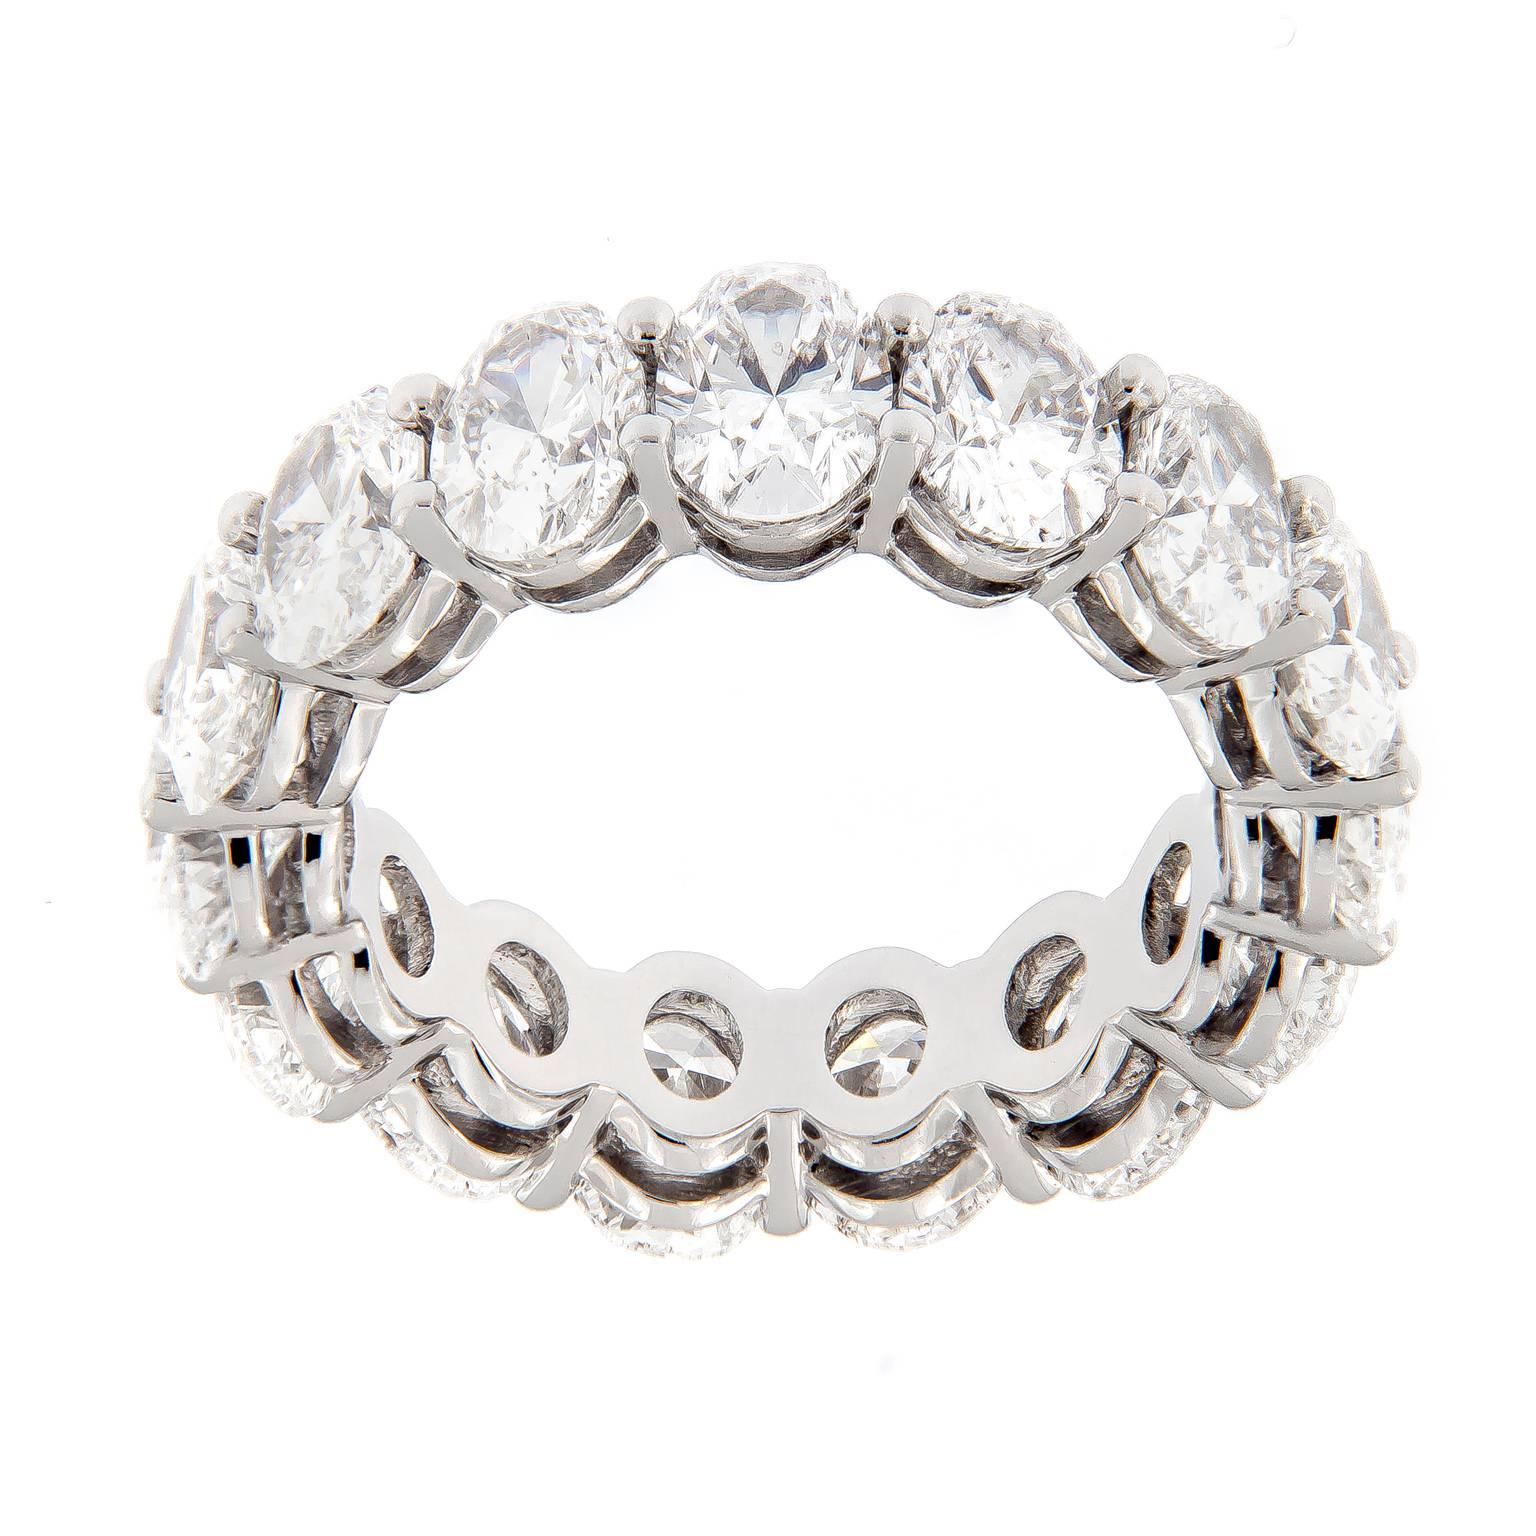 This stunning ring brings a very different look in the eternity band. Featuring 15 beautifully matched GIA oval-cut diamonds, expertly hand-crafted in platinum.
Ring size 6.25

Diamonds 7.73 cttw GIA D color VS-SI clarity 